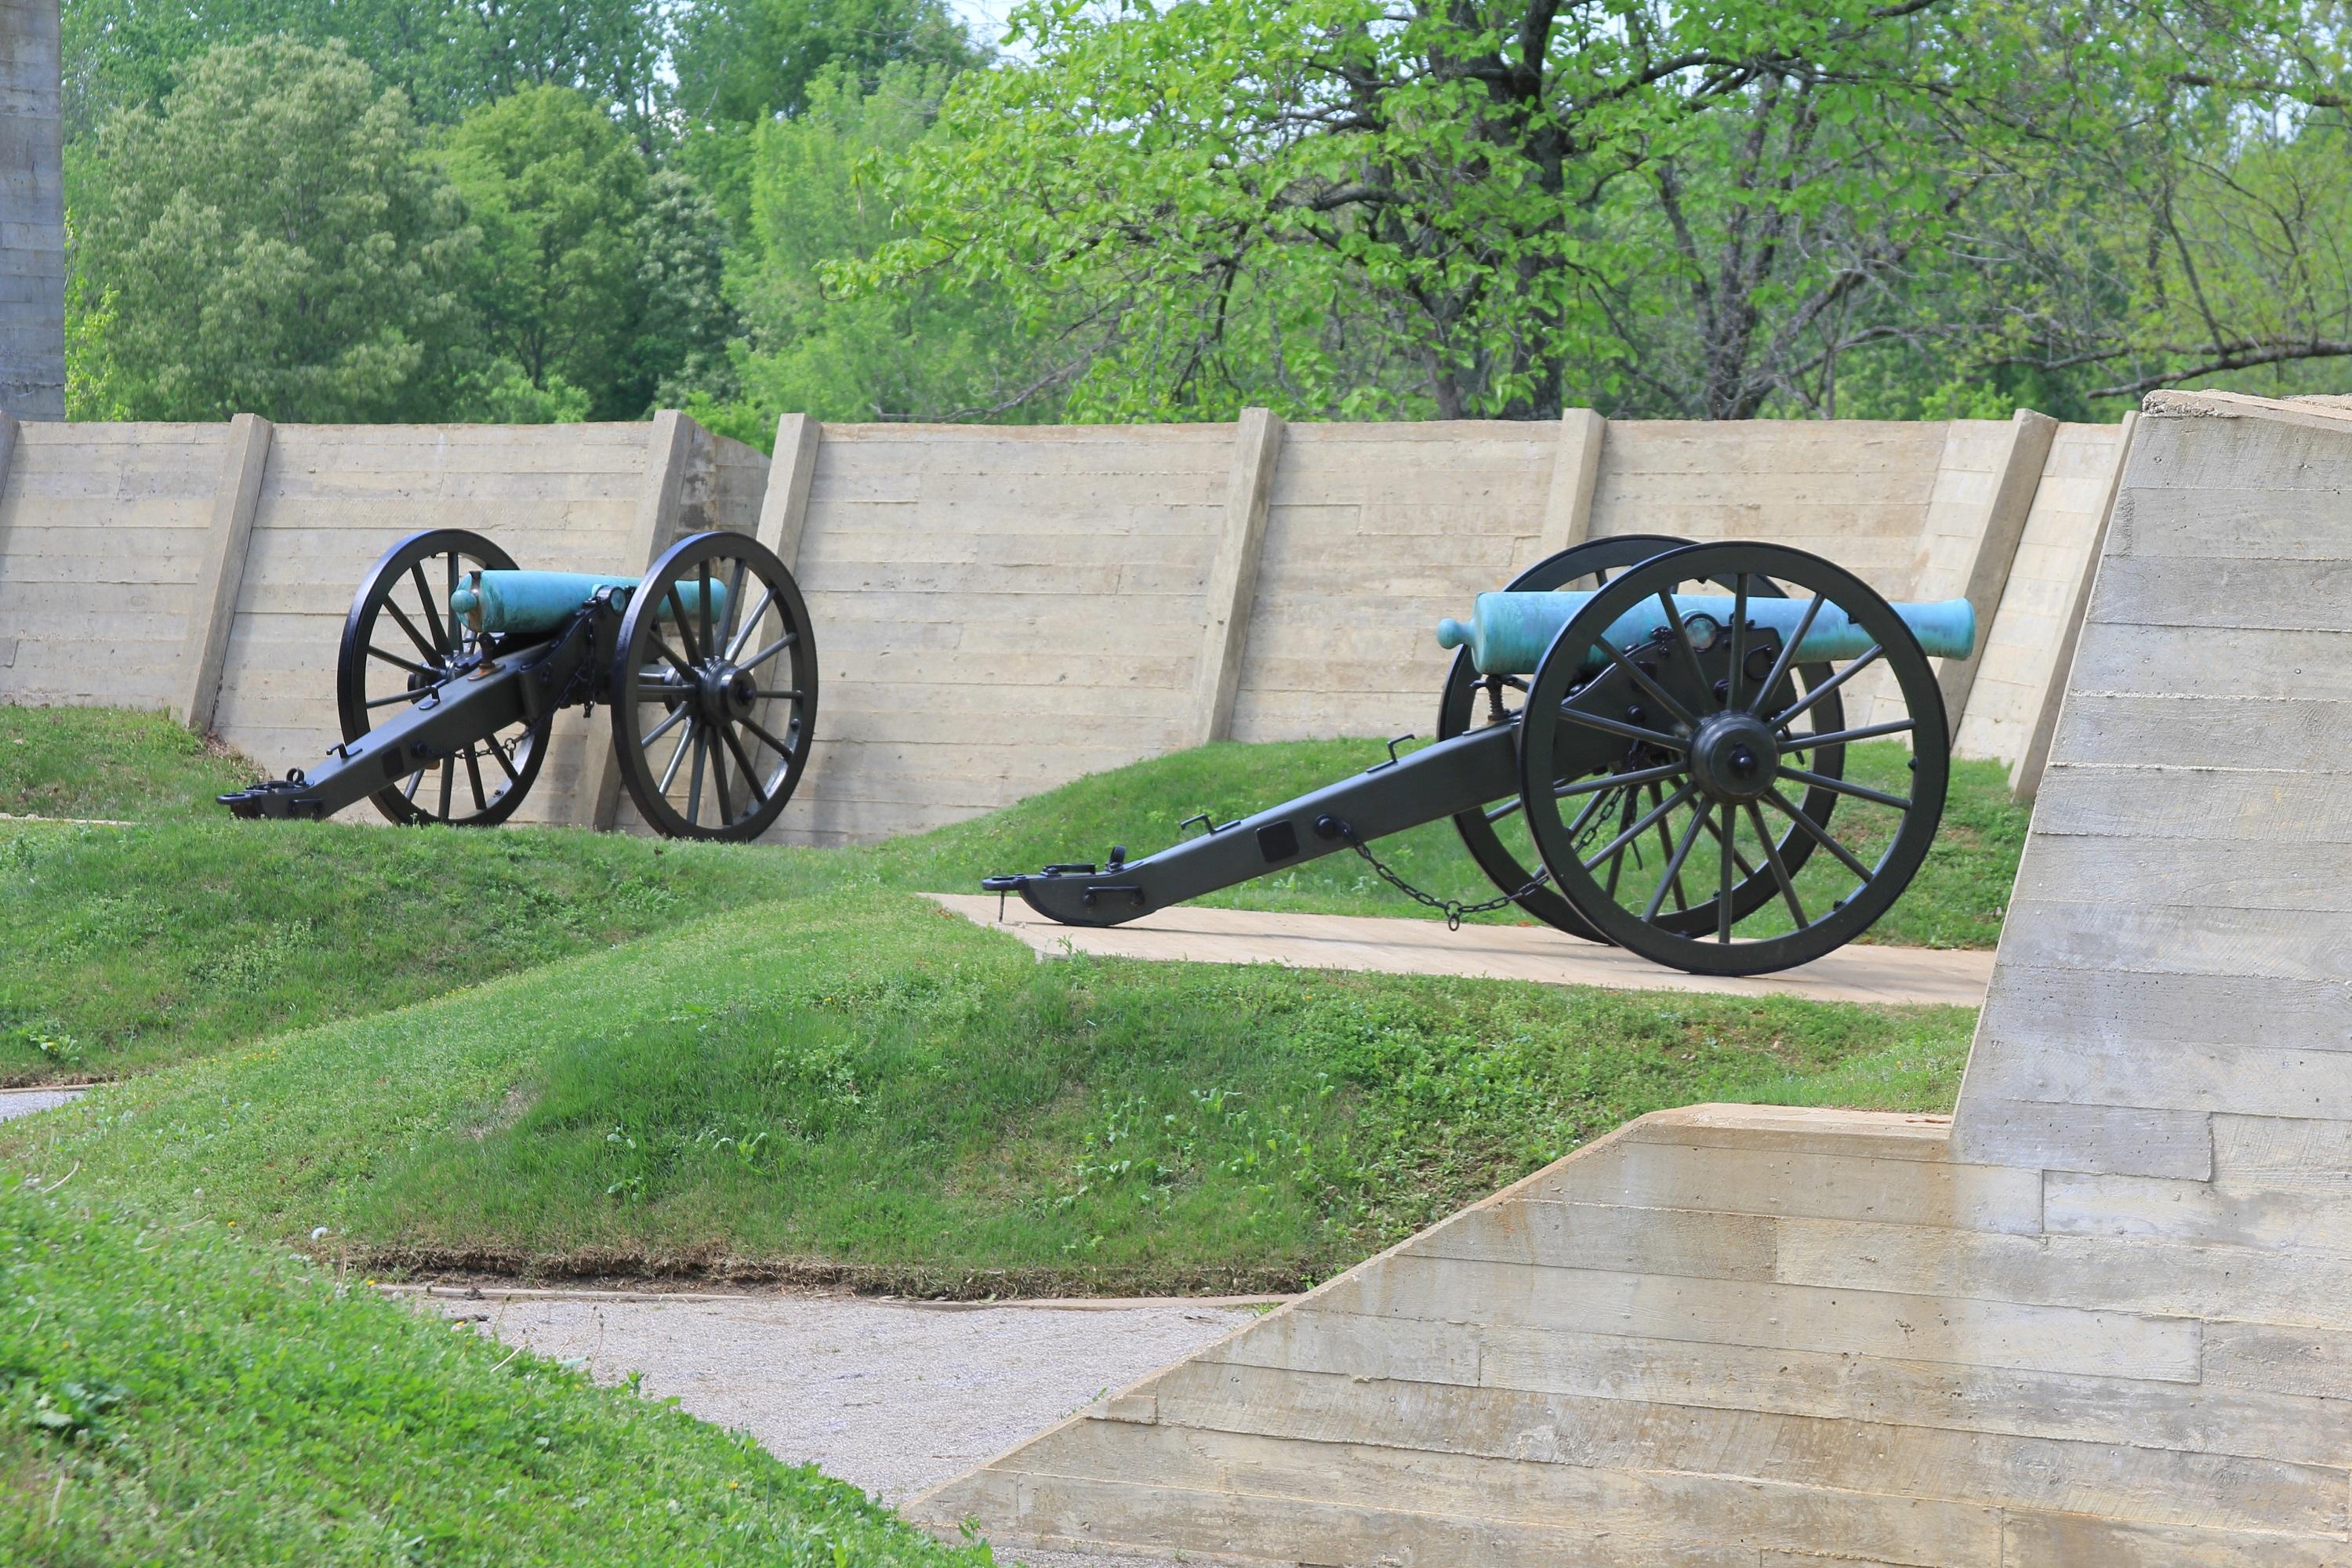 Two cannon is a reconstructed earthwork